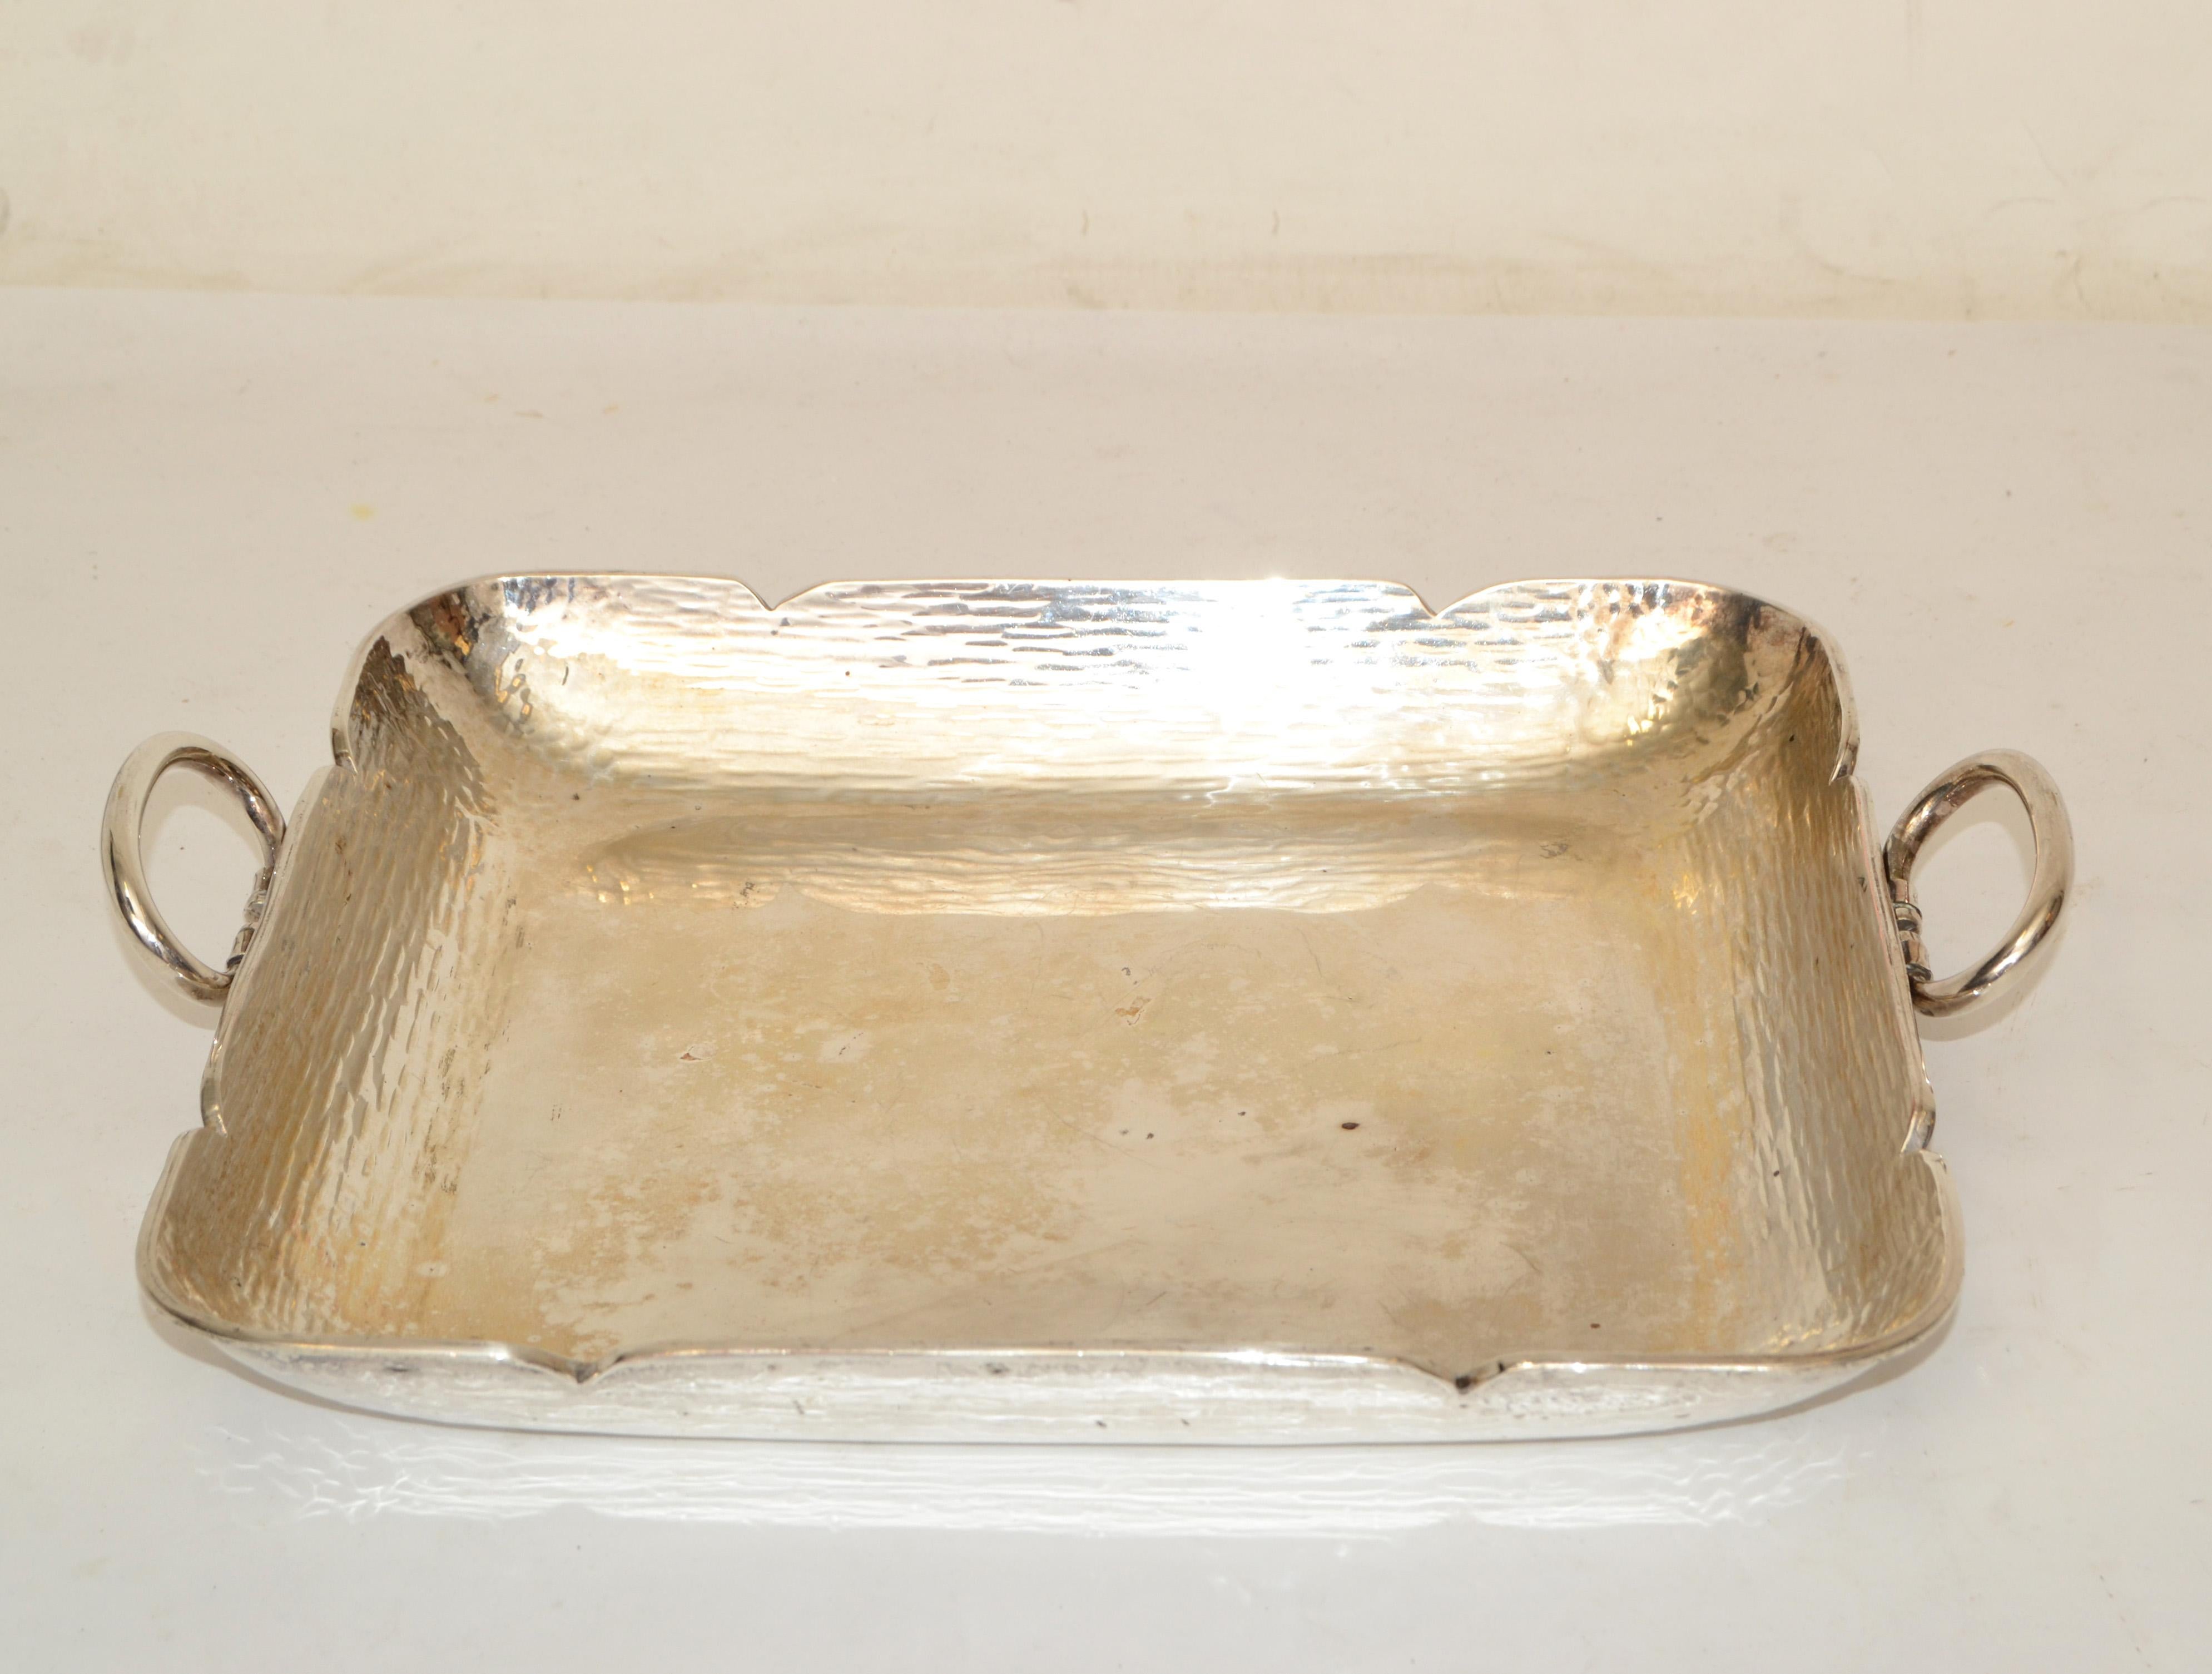 ceramic tray with handles